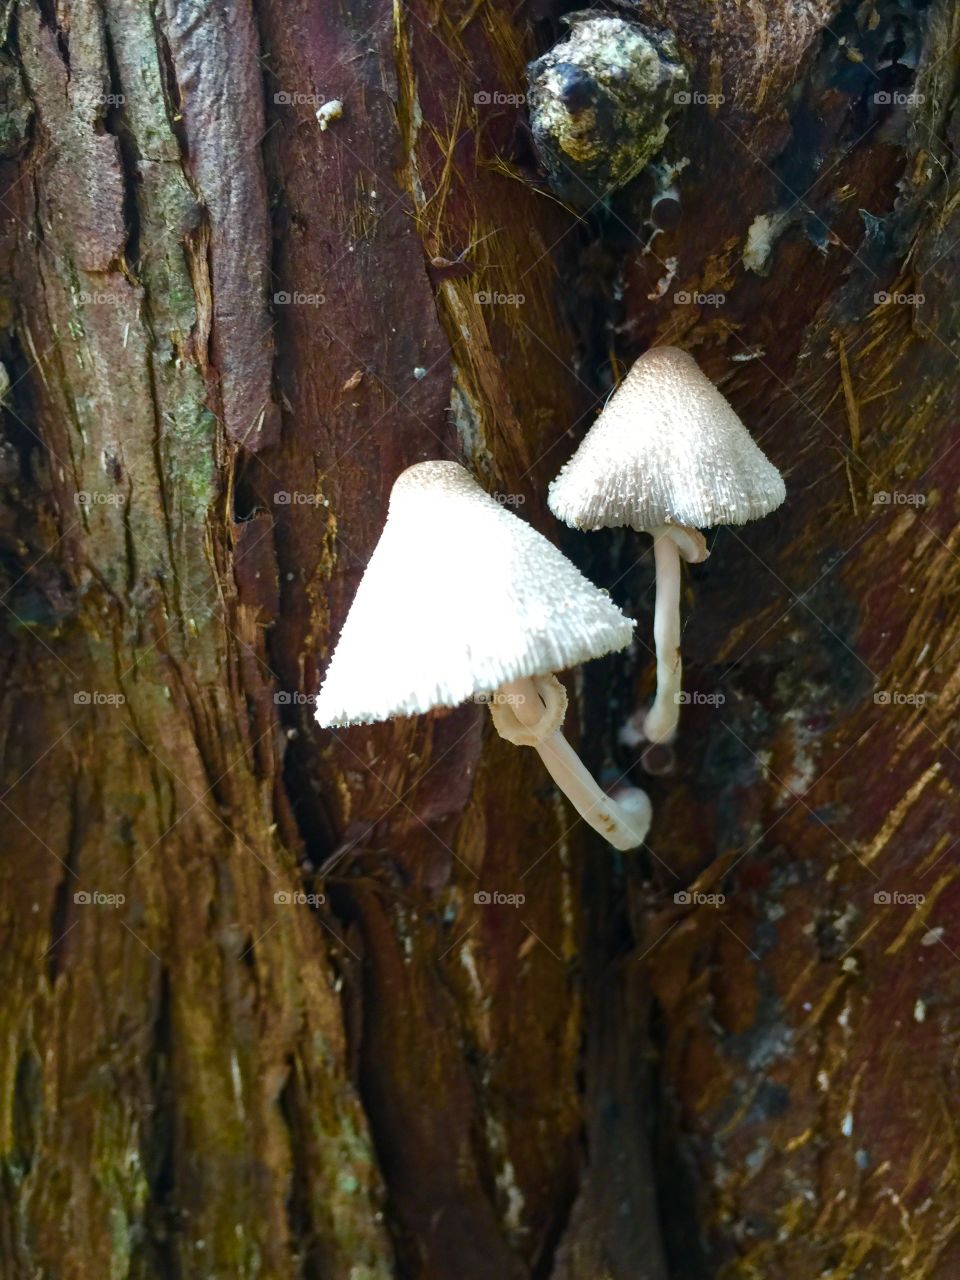 Two Mushrooms growing on a tree in the woods